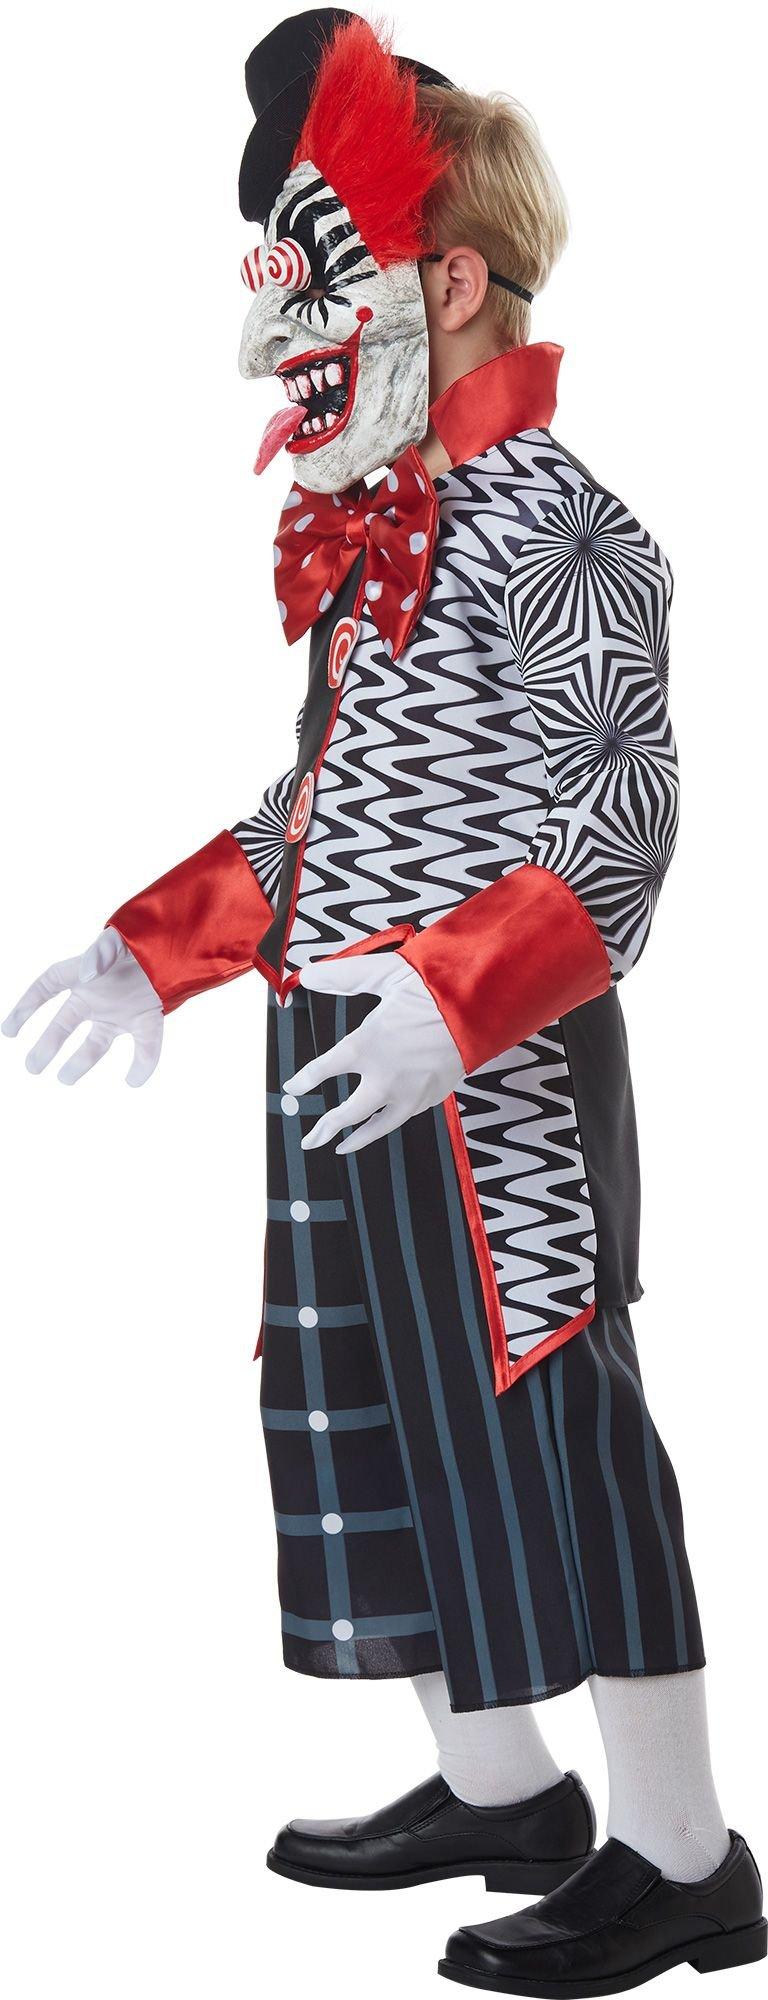 Googly Eyes Krazy Klown Costume for Kids | Party City